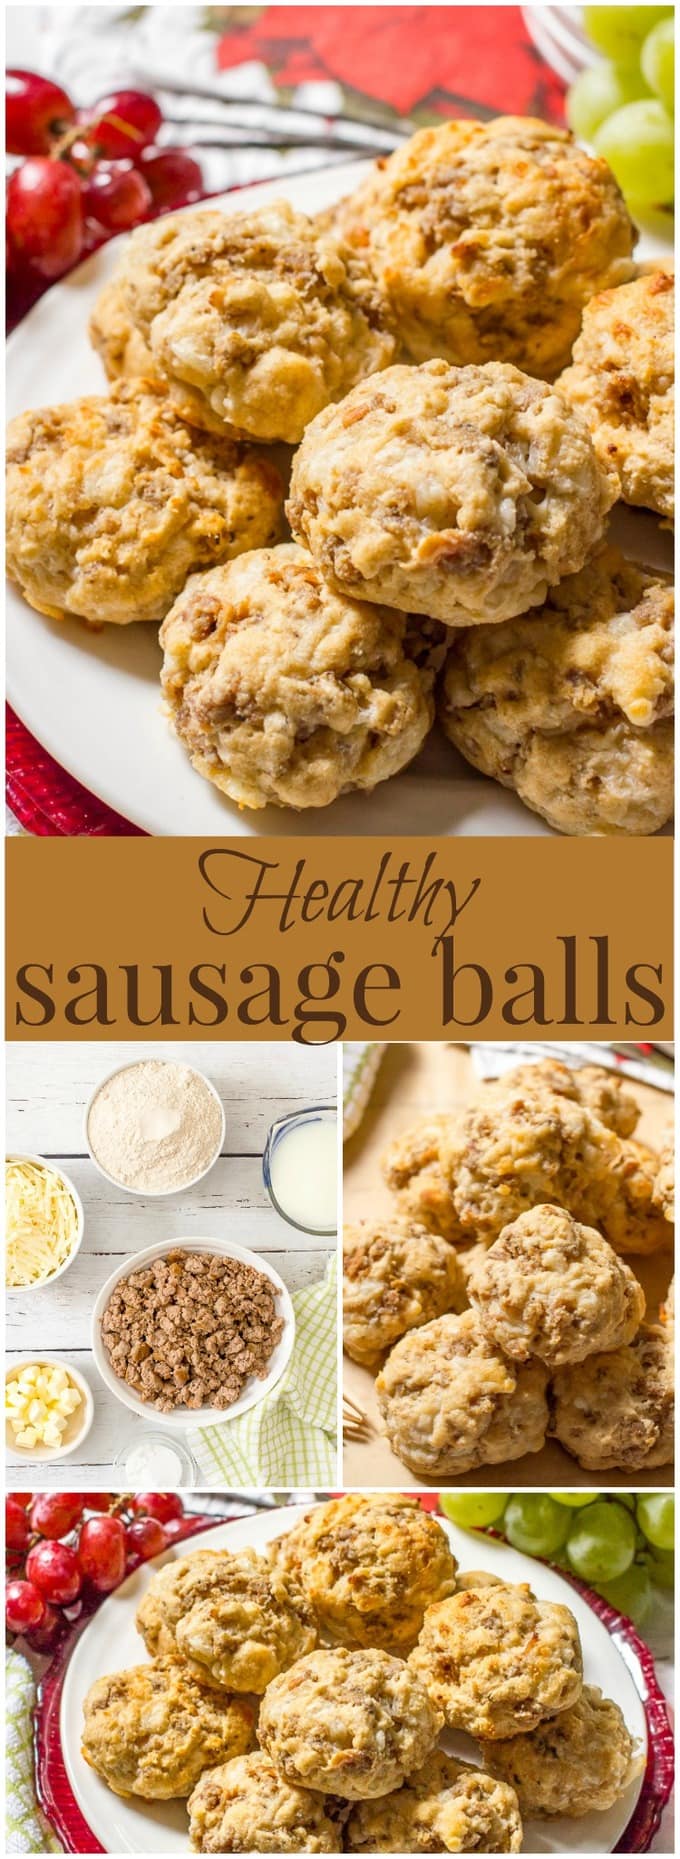 Healthy sausage balls use turkey sausage, skim milk and whole wheat flour for a lightened up version of this breakfast favorite! (They’re also great for Christmas brunch and game day eats!) | www.familyfoodonthetable.com